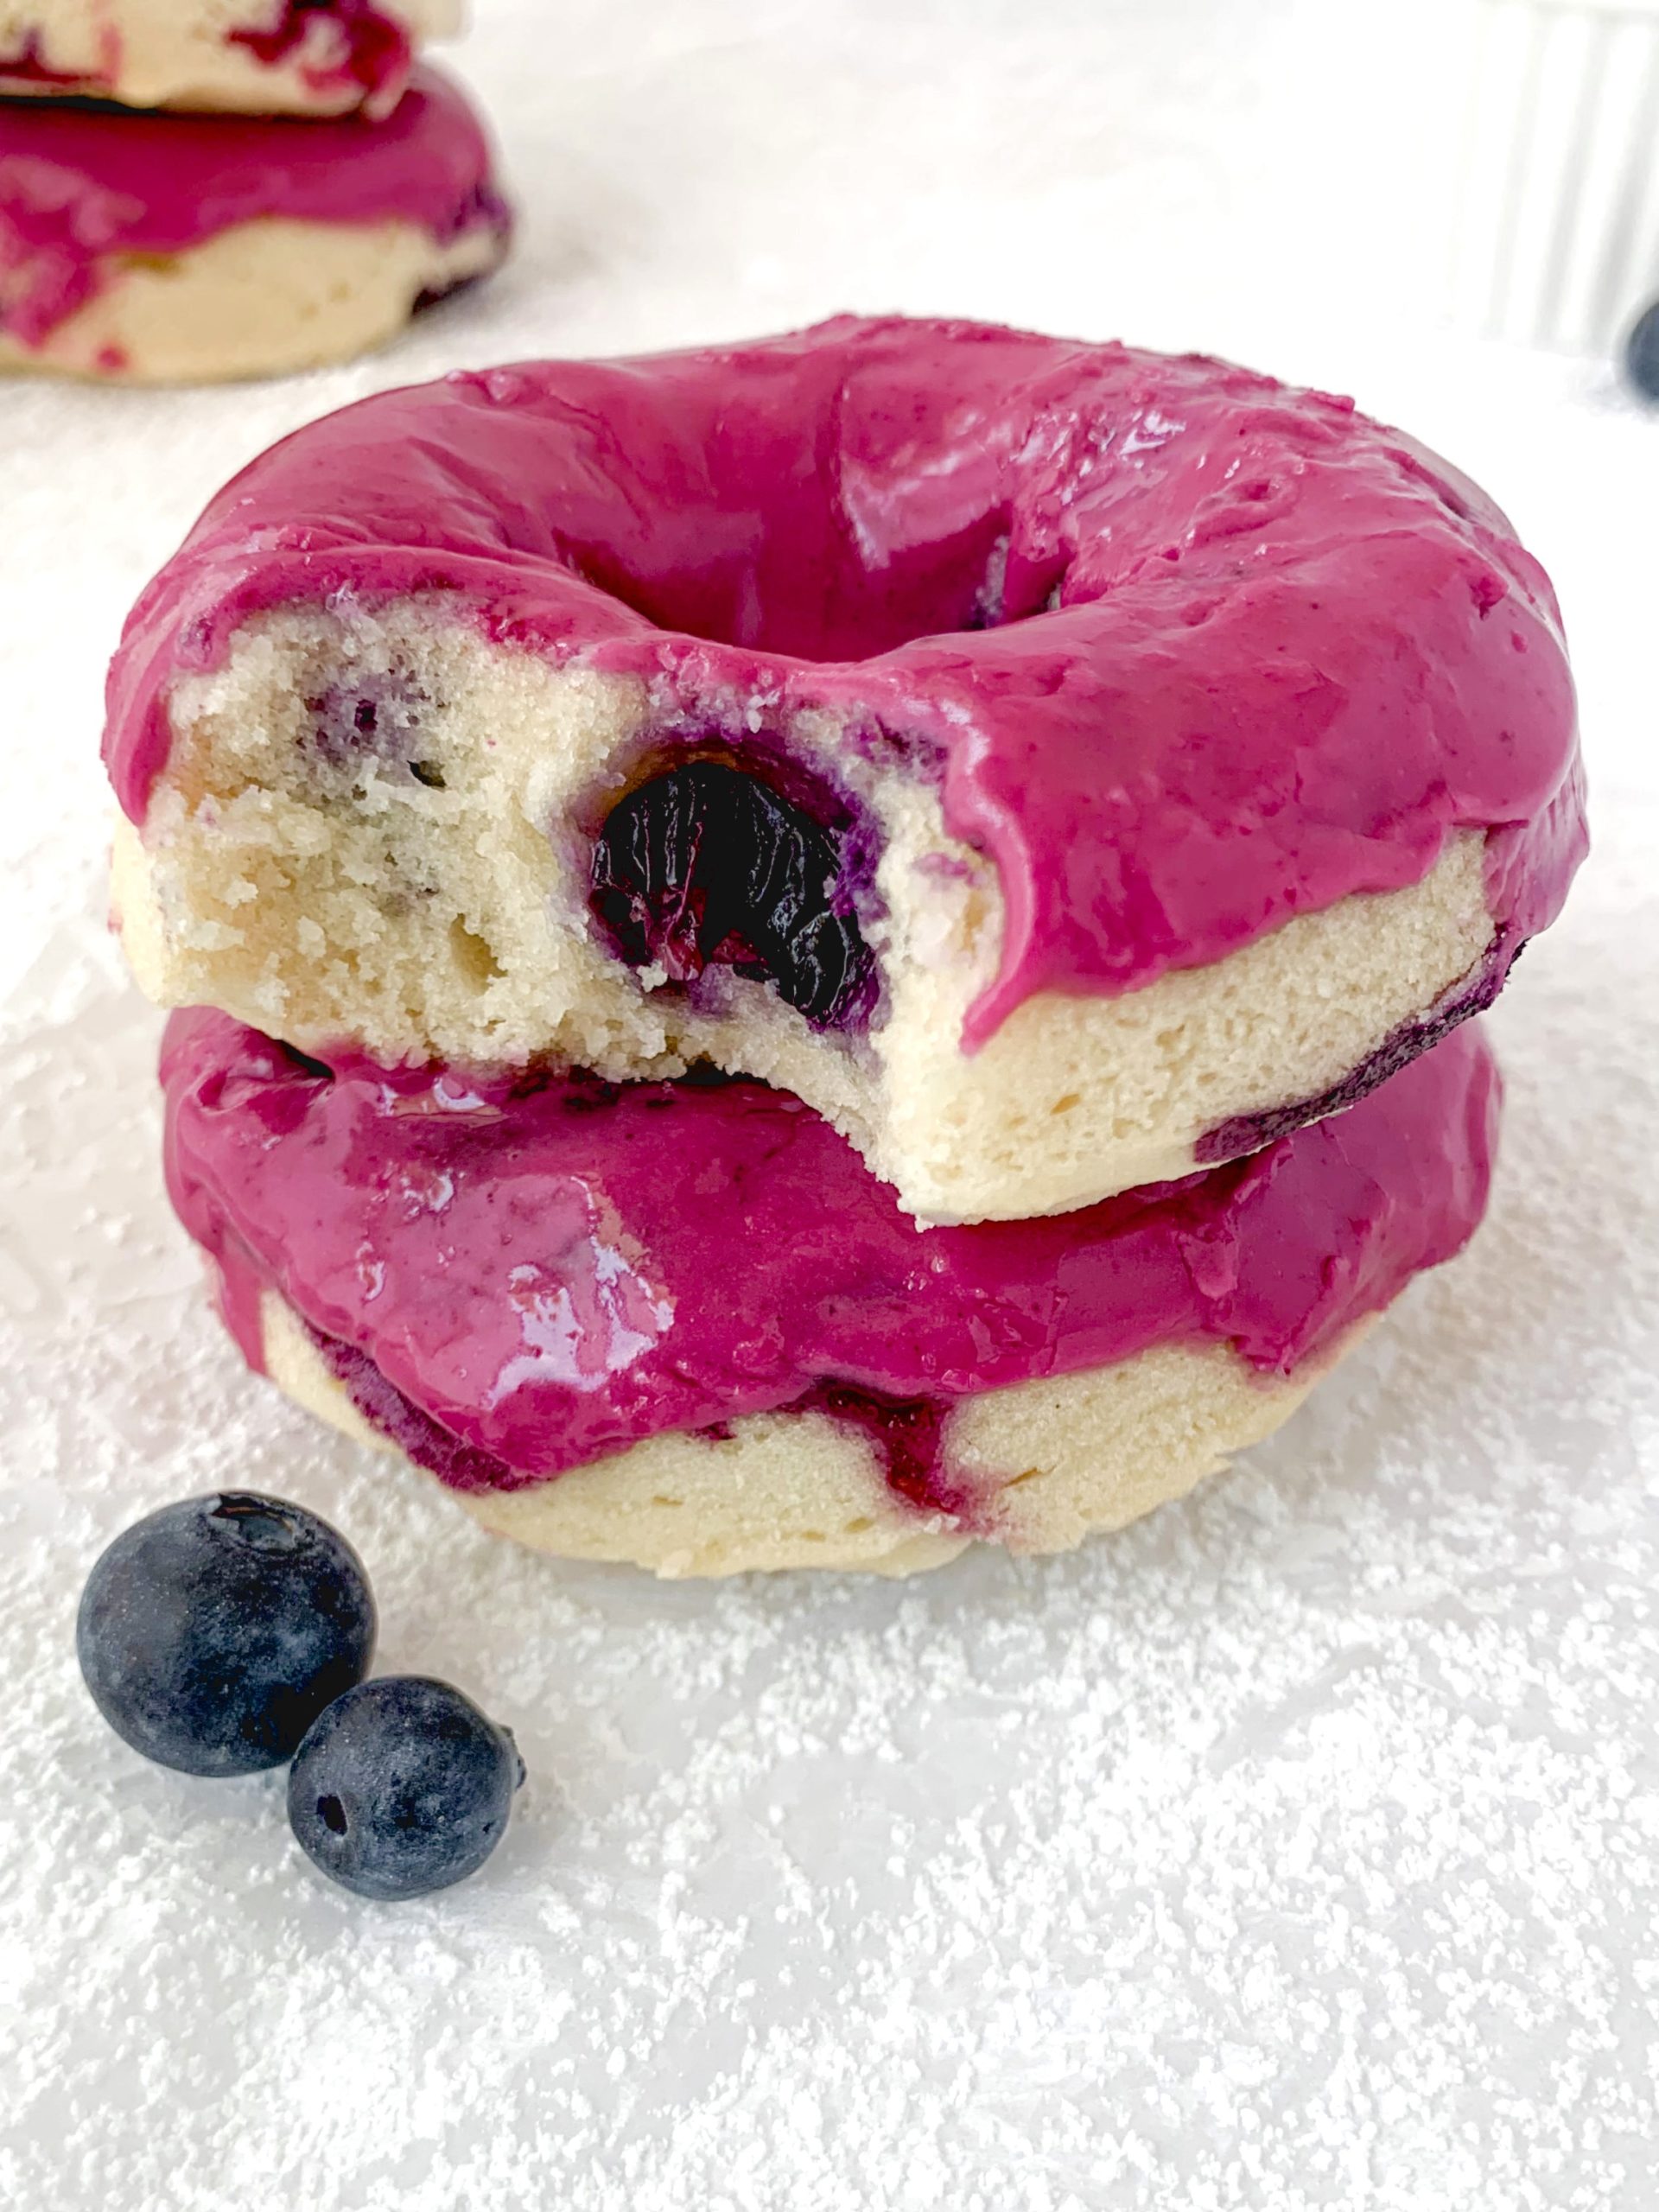 Two donuts on top of each other, one with a bite taken out, both with a bright pink glaze